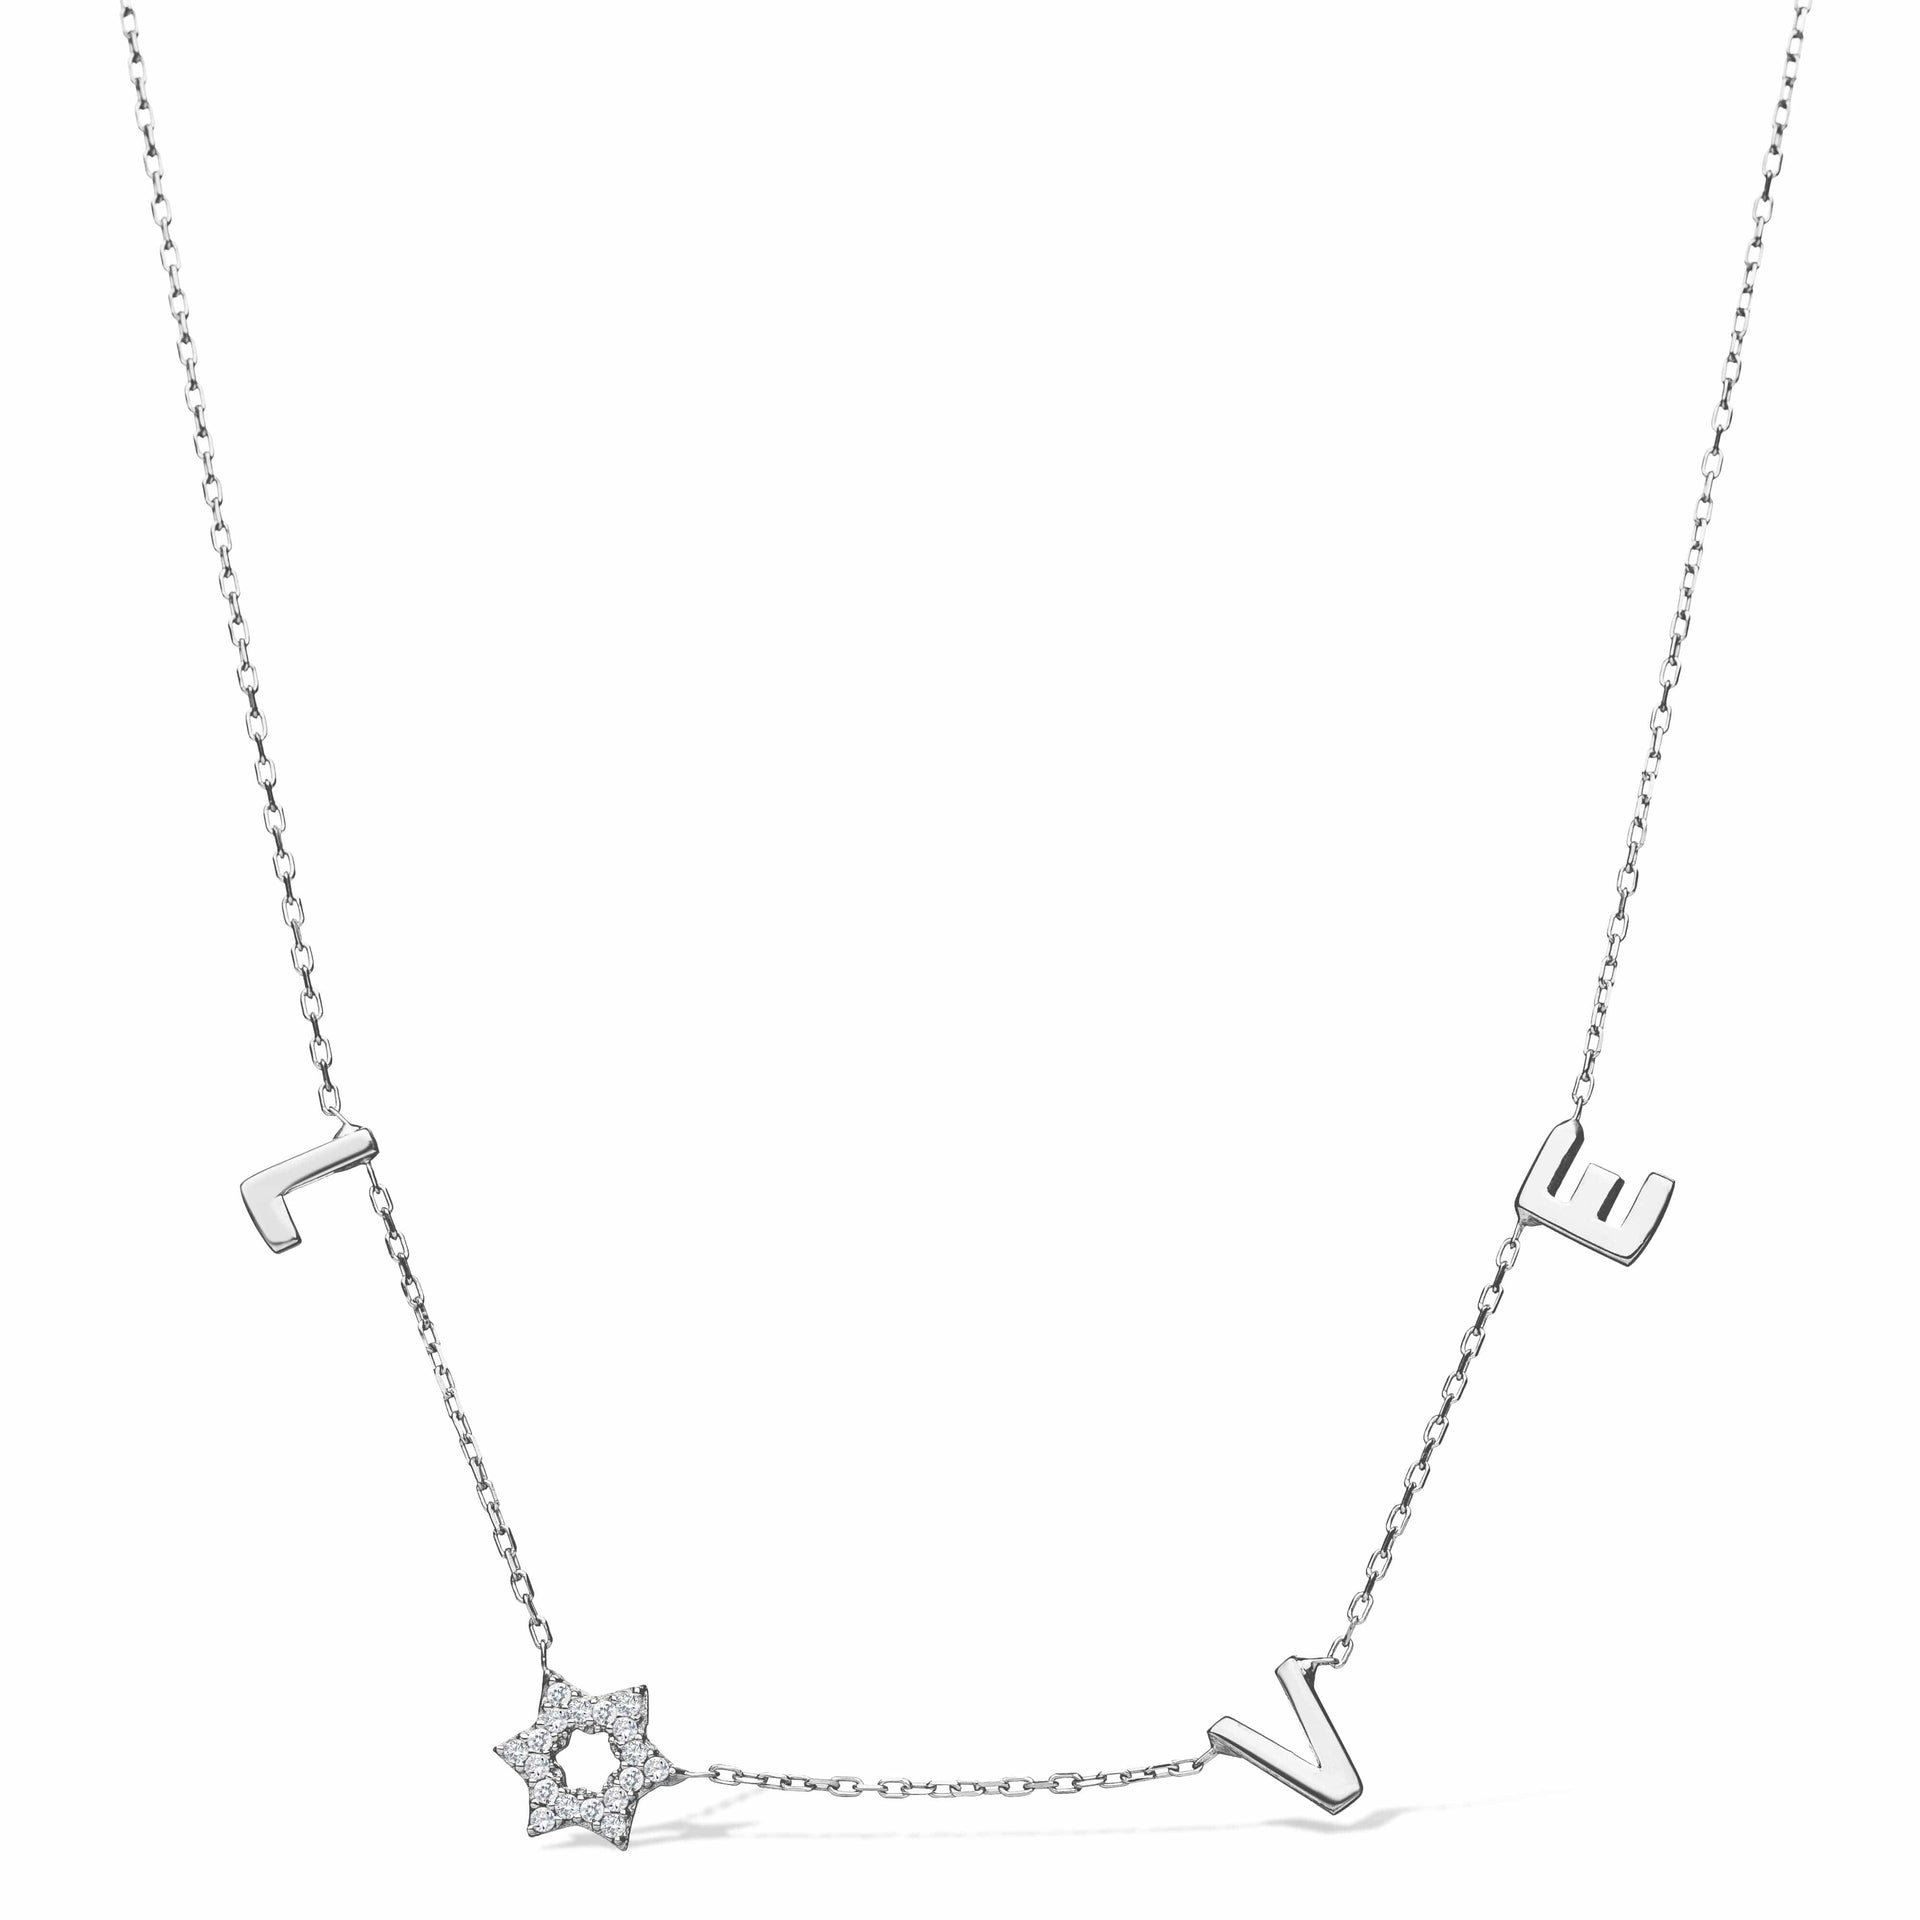 Alef Bet Necklaces Sterling Silver Love Necklace with a Sparkling Star of David - Silver, Gold or Rose Gold